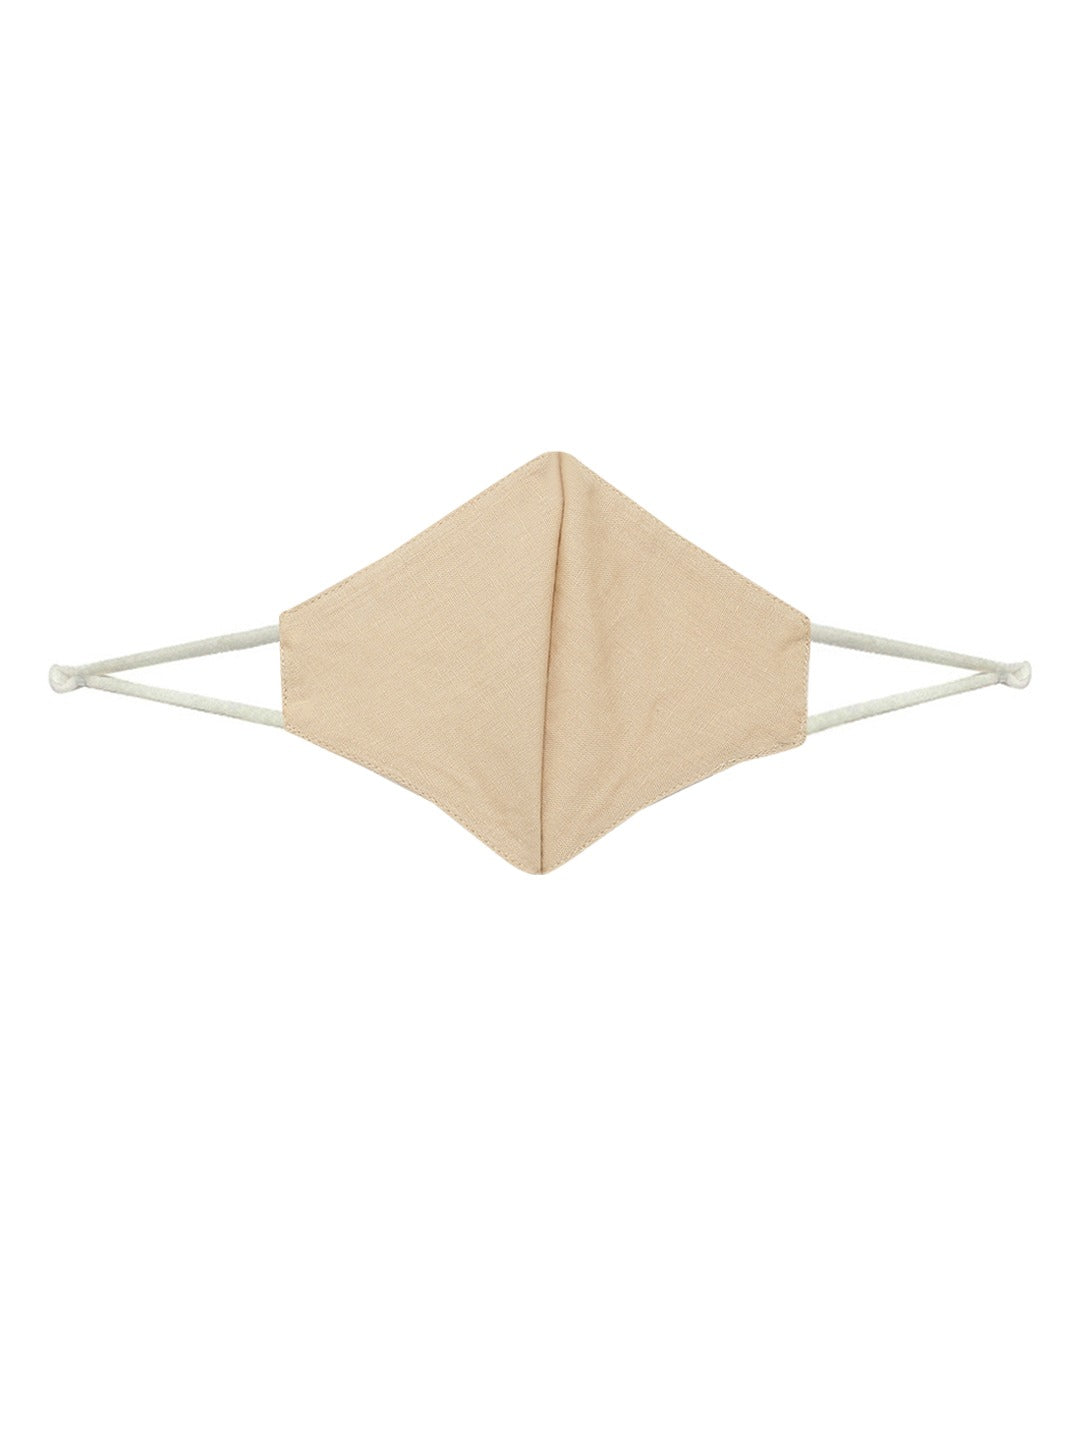 Blueberry Khaki solid 2 ply cotton reusable chain mask